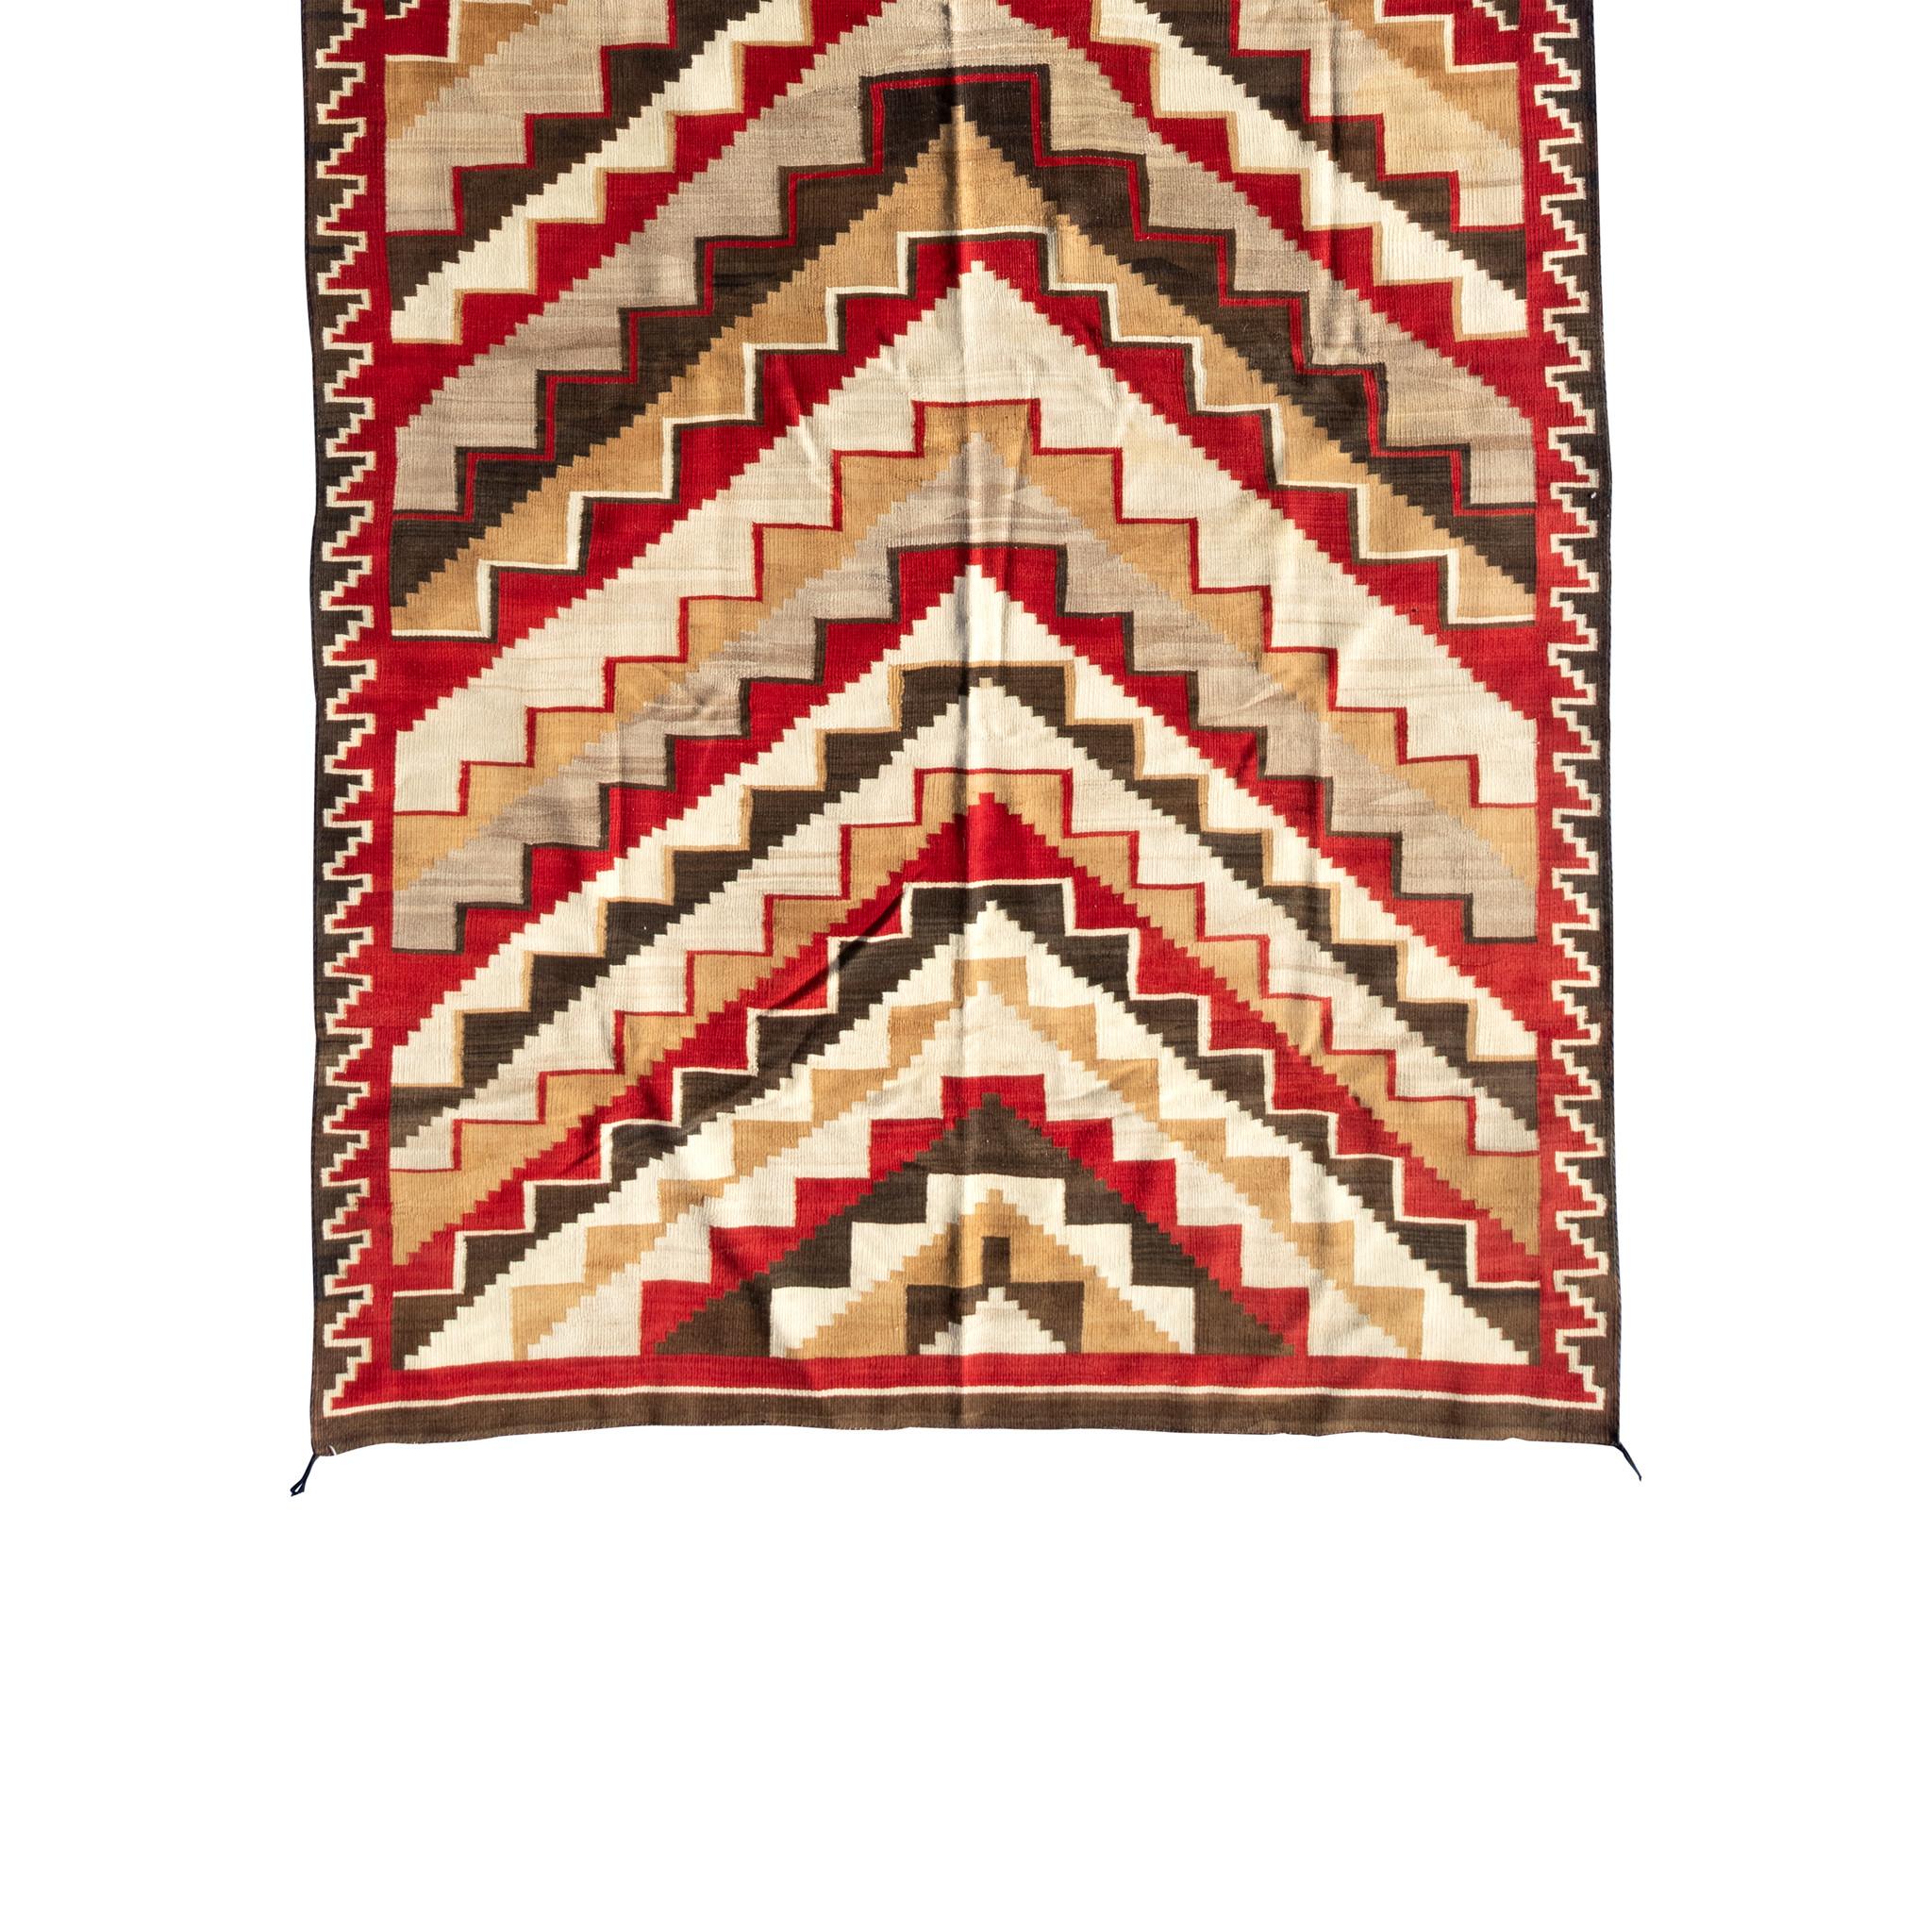 Large Navajo Ganado weaving. Featuring stunning geometric patterns and bright red, brown, cream and yellow colors. Large piece that would make a great floor rug or wall hanging. Early 20th century. 7'9